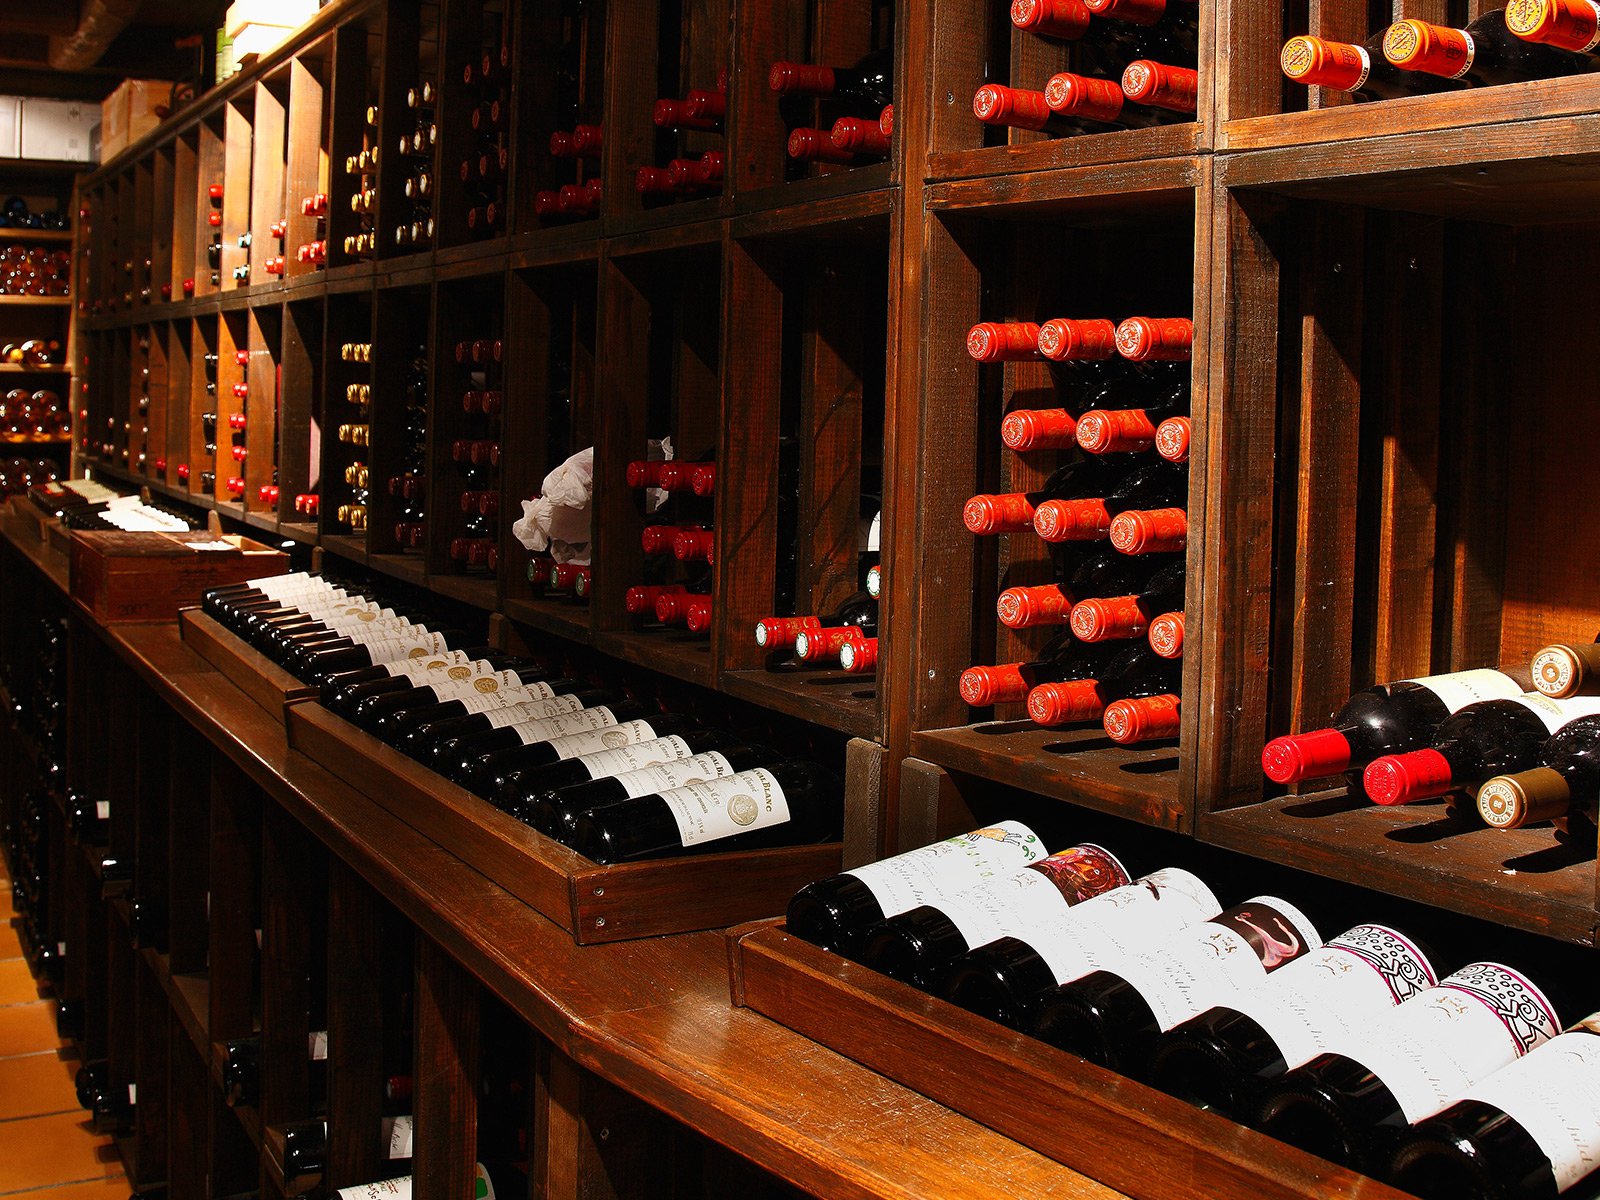 Domaine de Châteauvieux offers an impressive wine cellar with more than 800 exquisite wines on its menu.